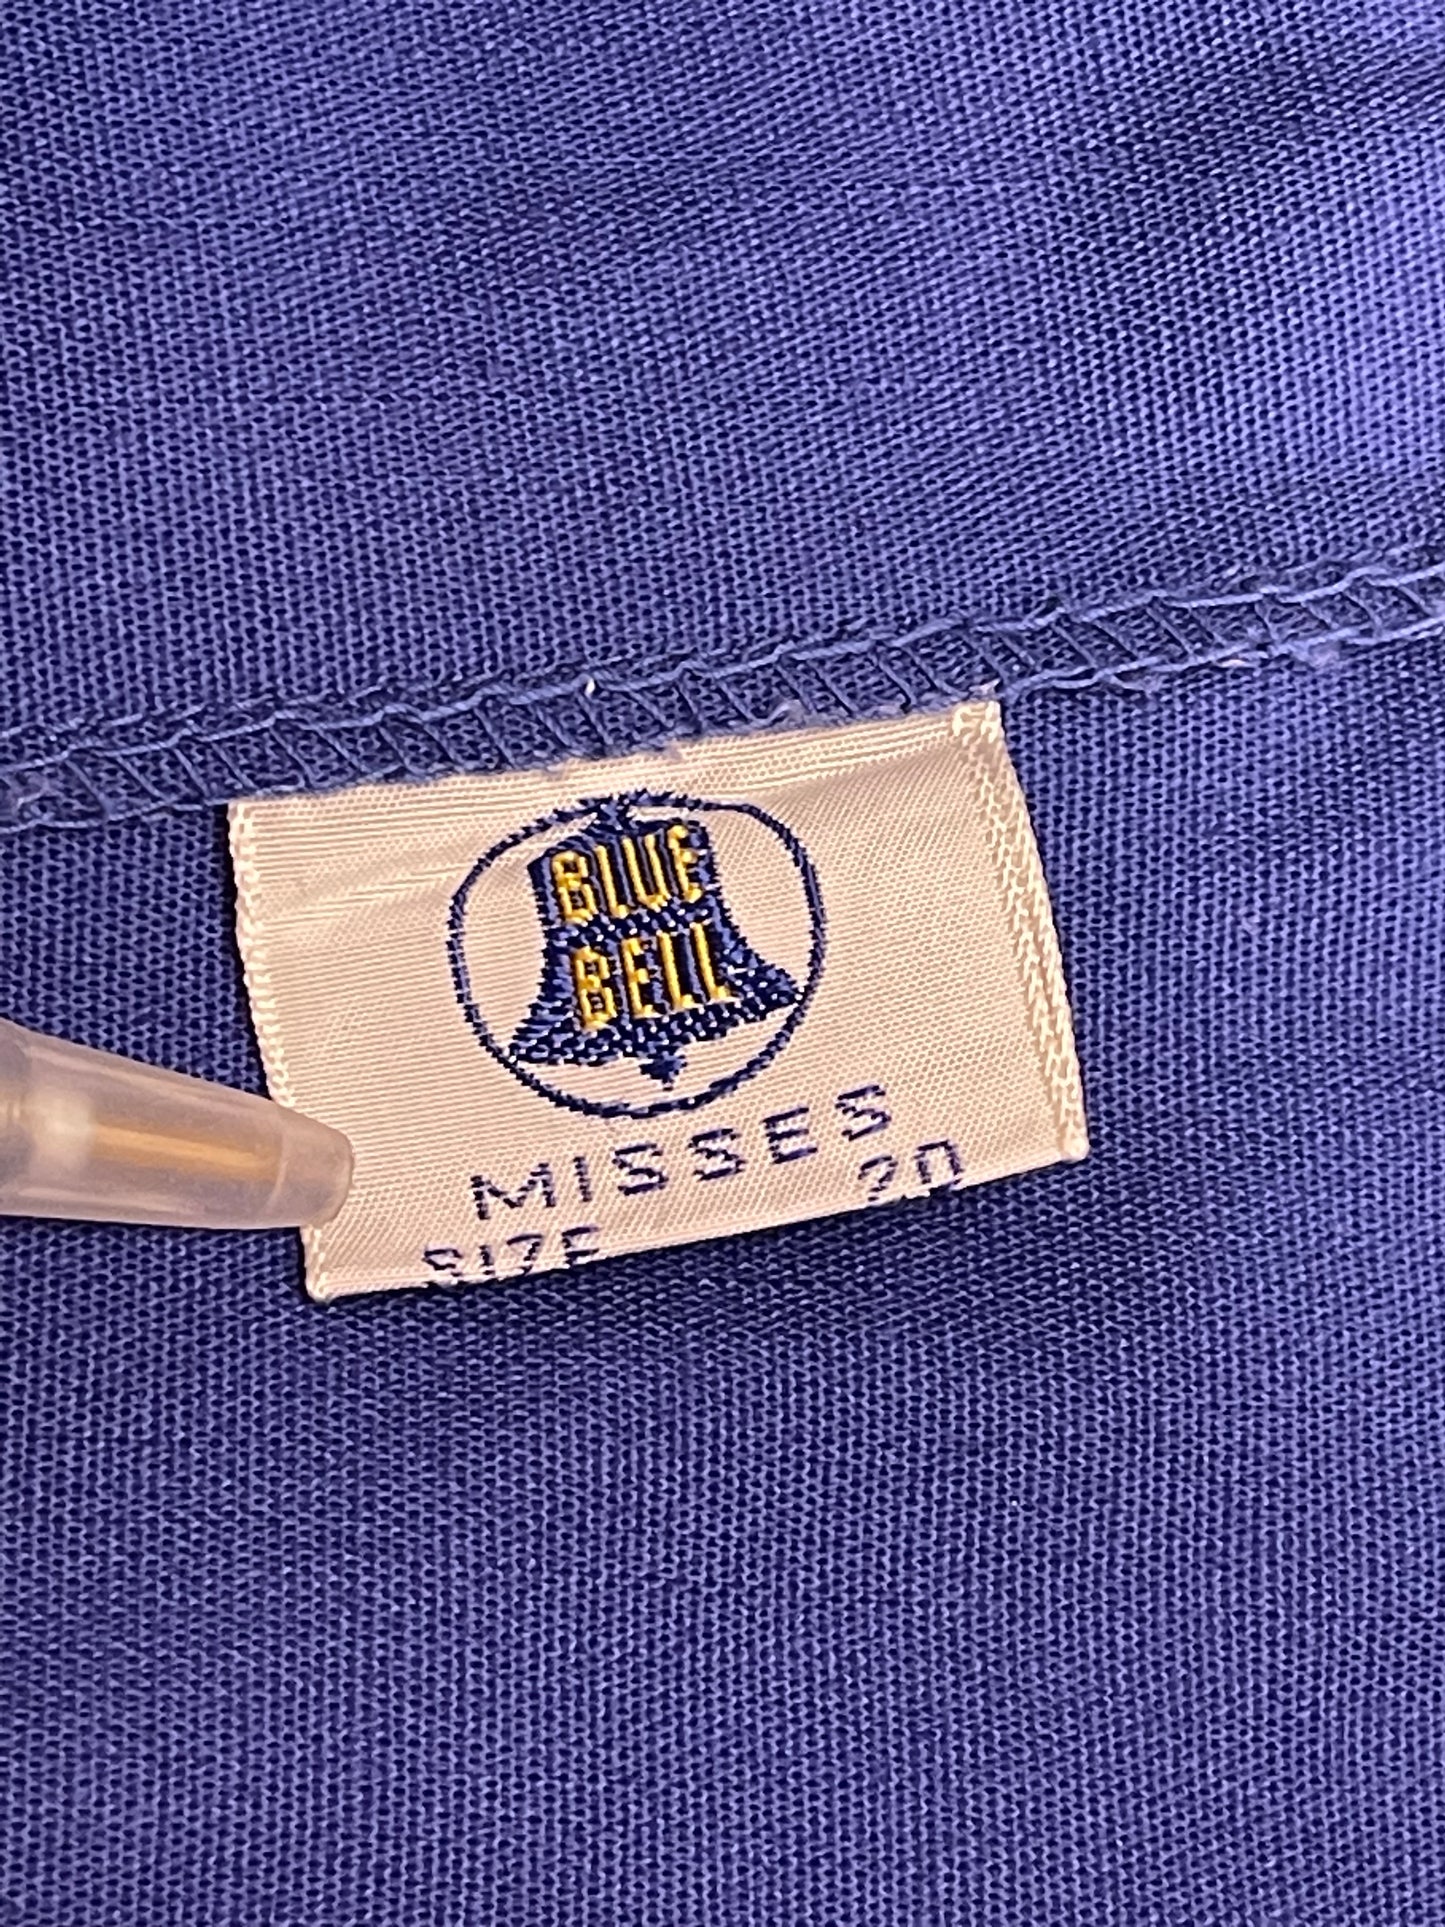 1960s Blue Bell Volup NOS Shorts